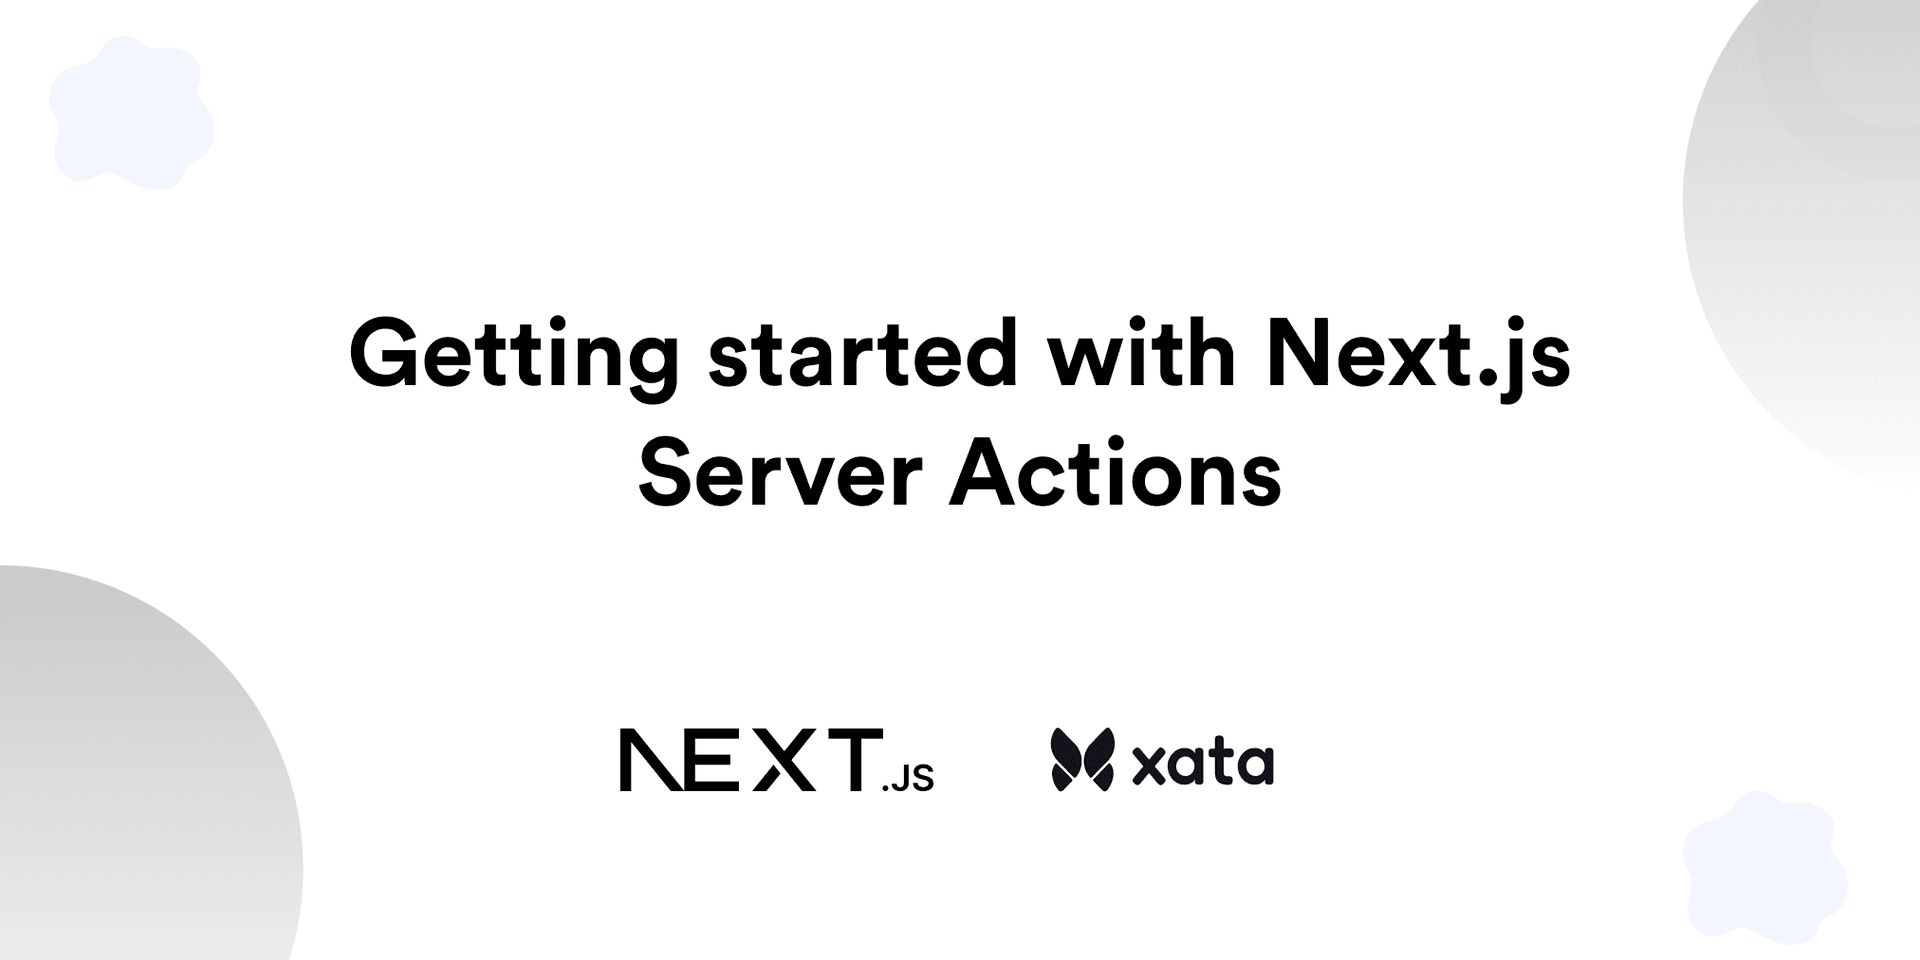 Getting started with Next.js 14 Server Actions's image